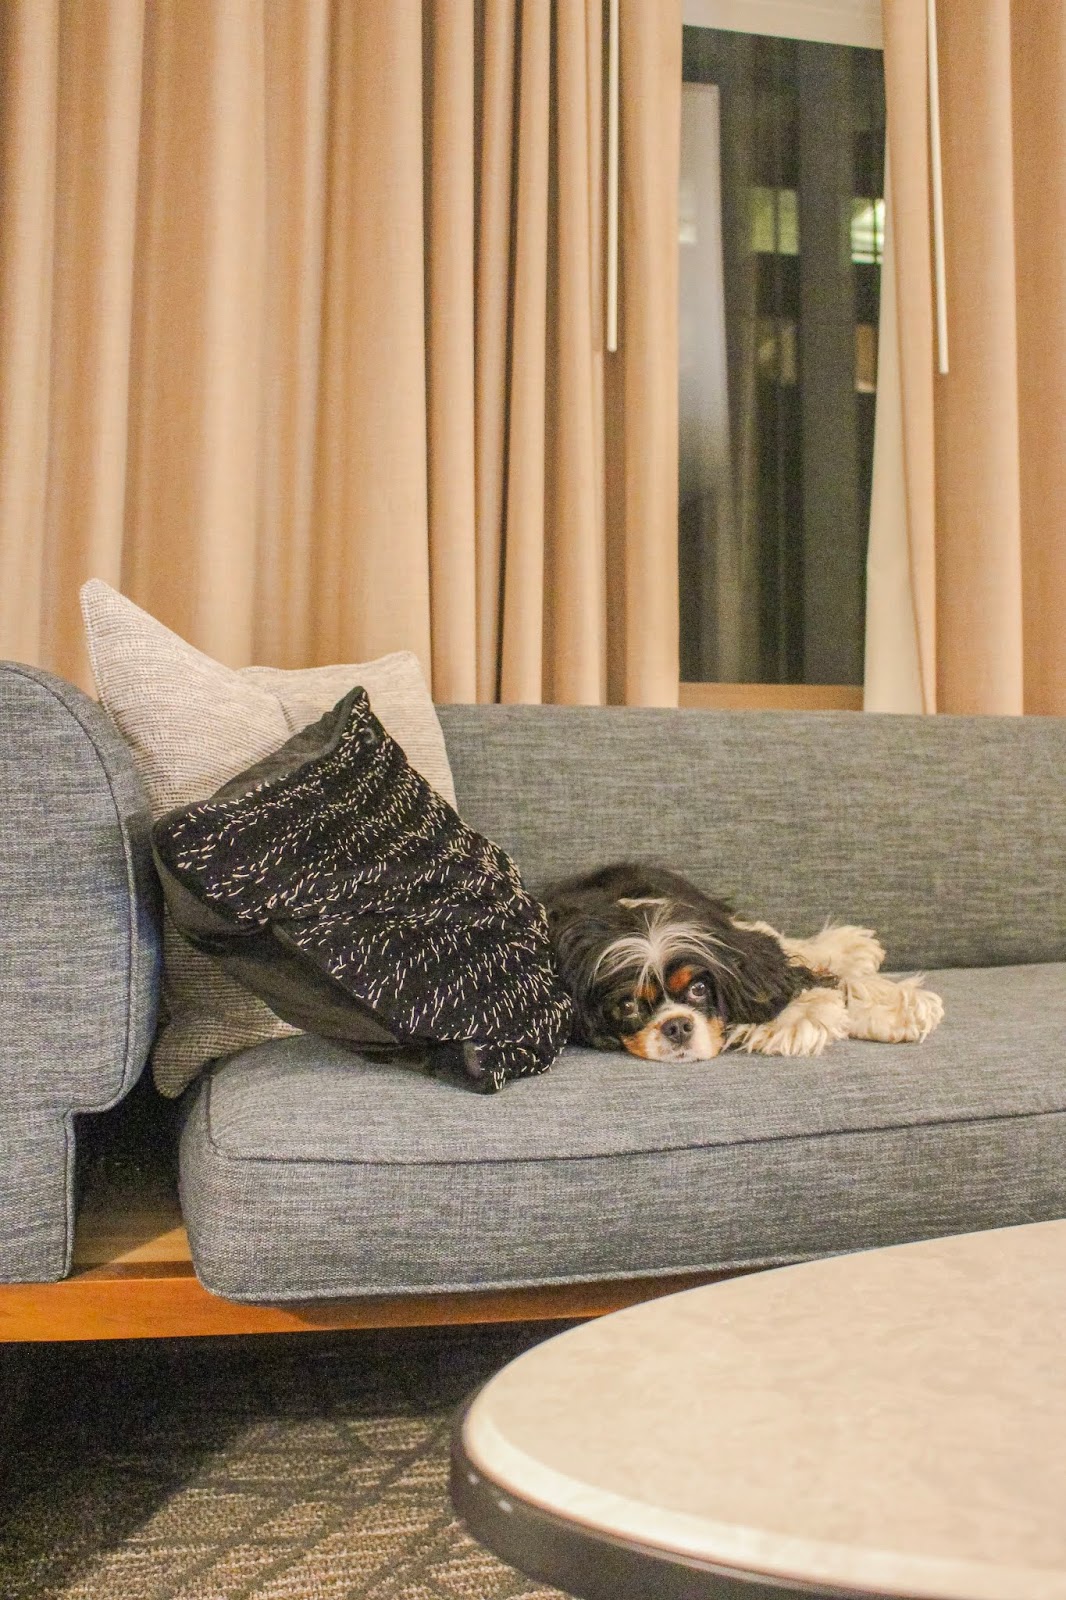 Where to Stay in Chicago, Fairmont Chicago Review - Pet Friendly Hotel - Cavalier King Charles Spaniel Puppy